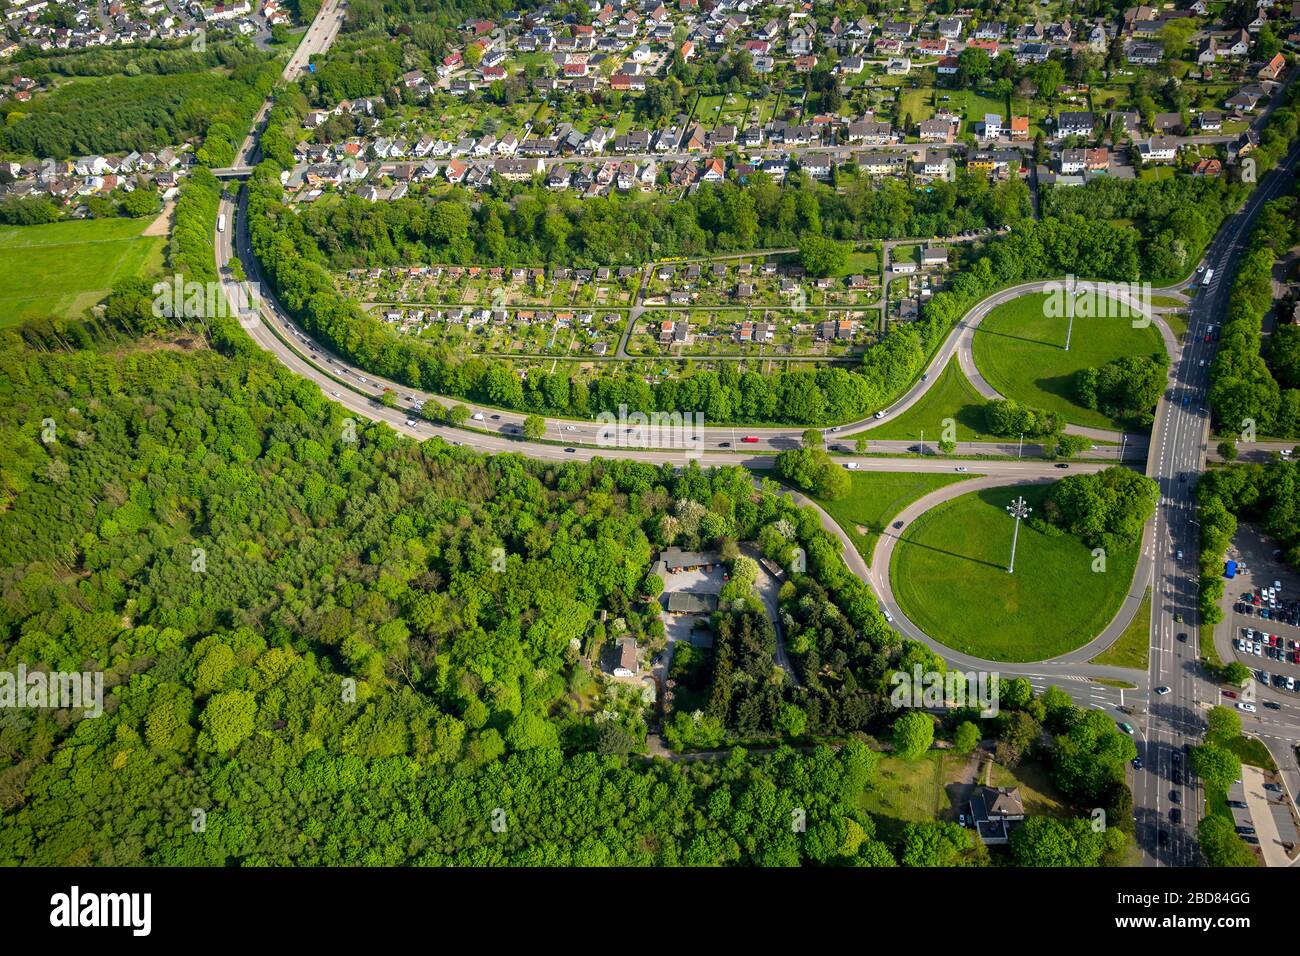 , Routing and traffic lanes at the highway exit A 46 in Hagen, 09.05.2016, aerial view, Germany, North Rhine-Westphalia, Ruhr Area, Hagen Stock Photo